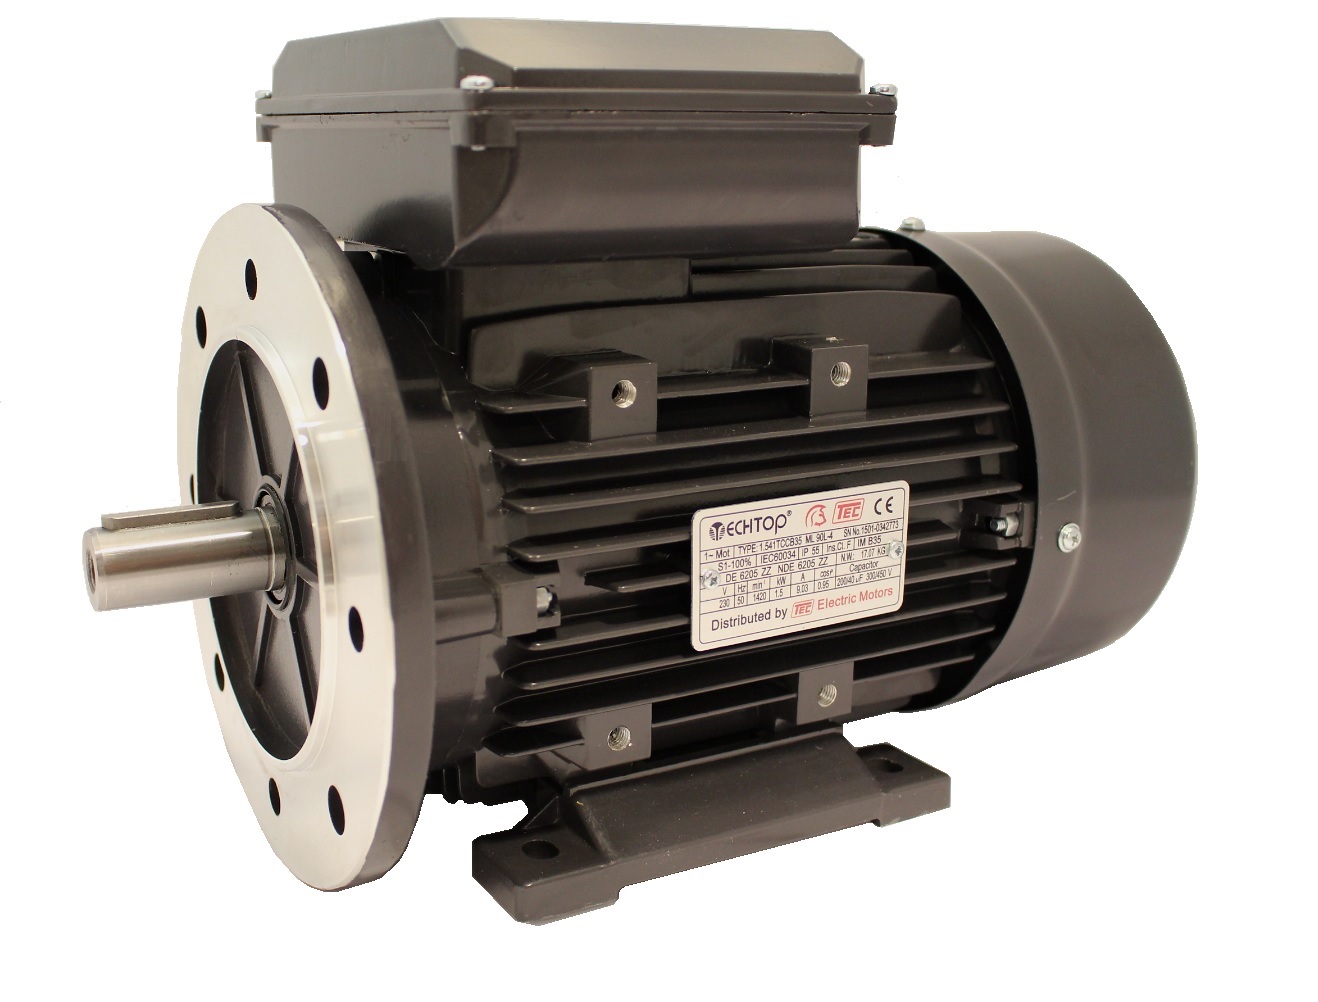 Single Phase  110v Electric Motor, 2.2Kw 4 pole 1500rpm with flange and foot mount